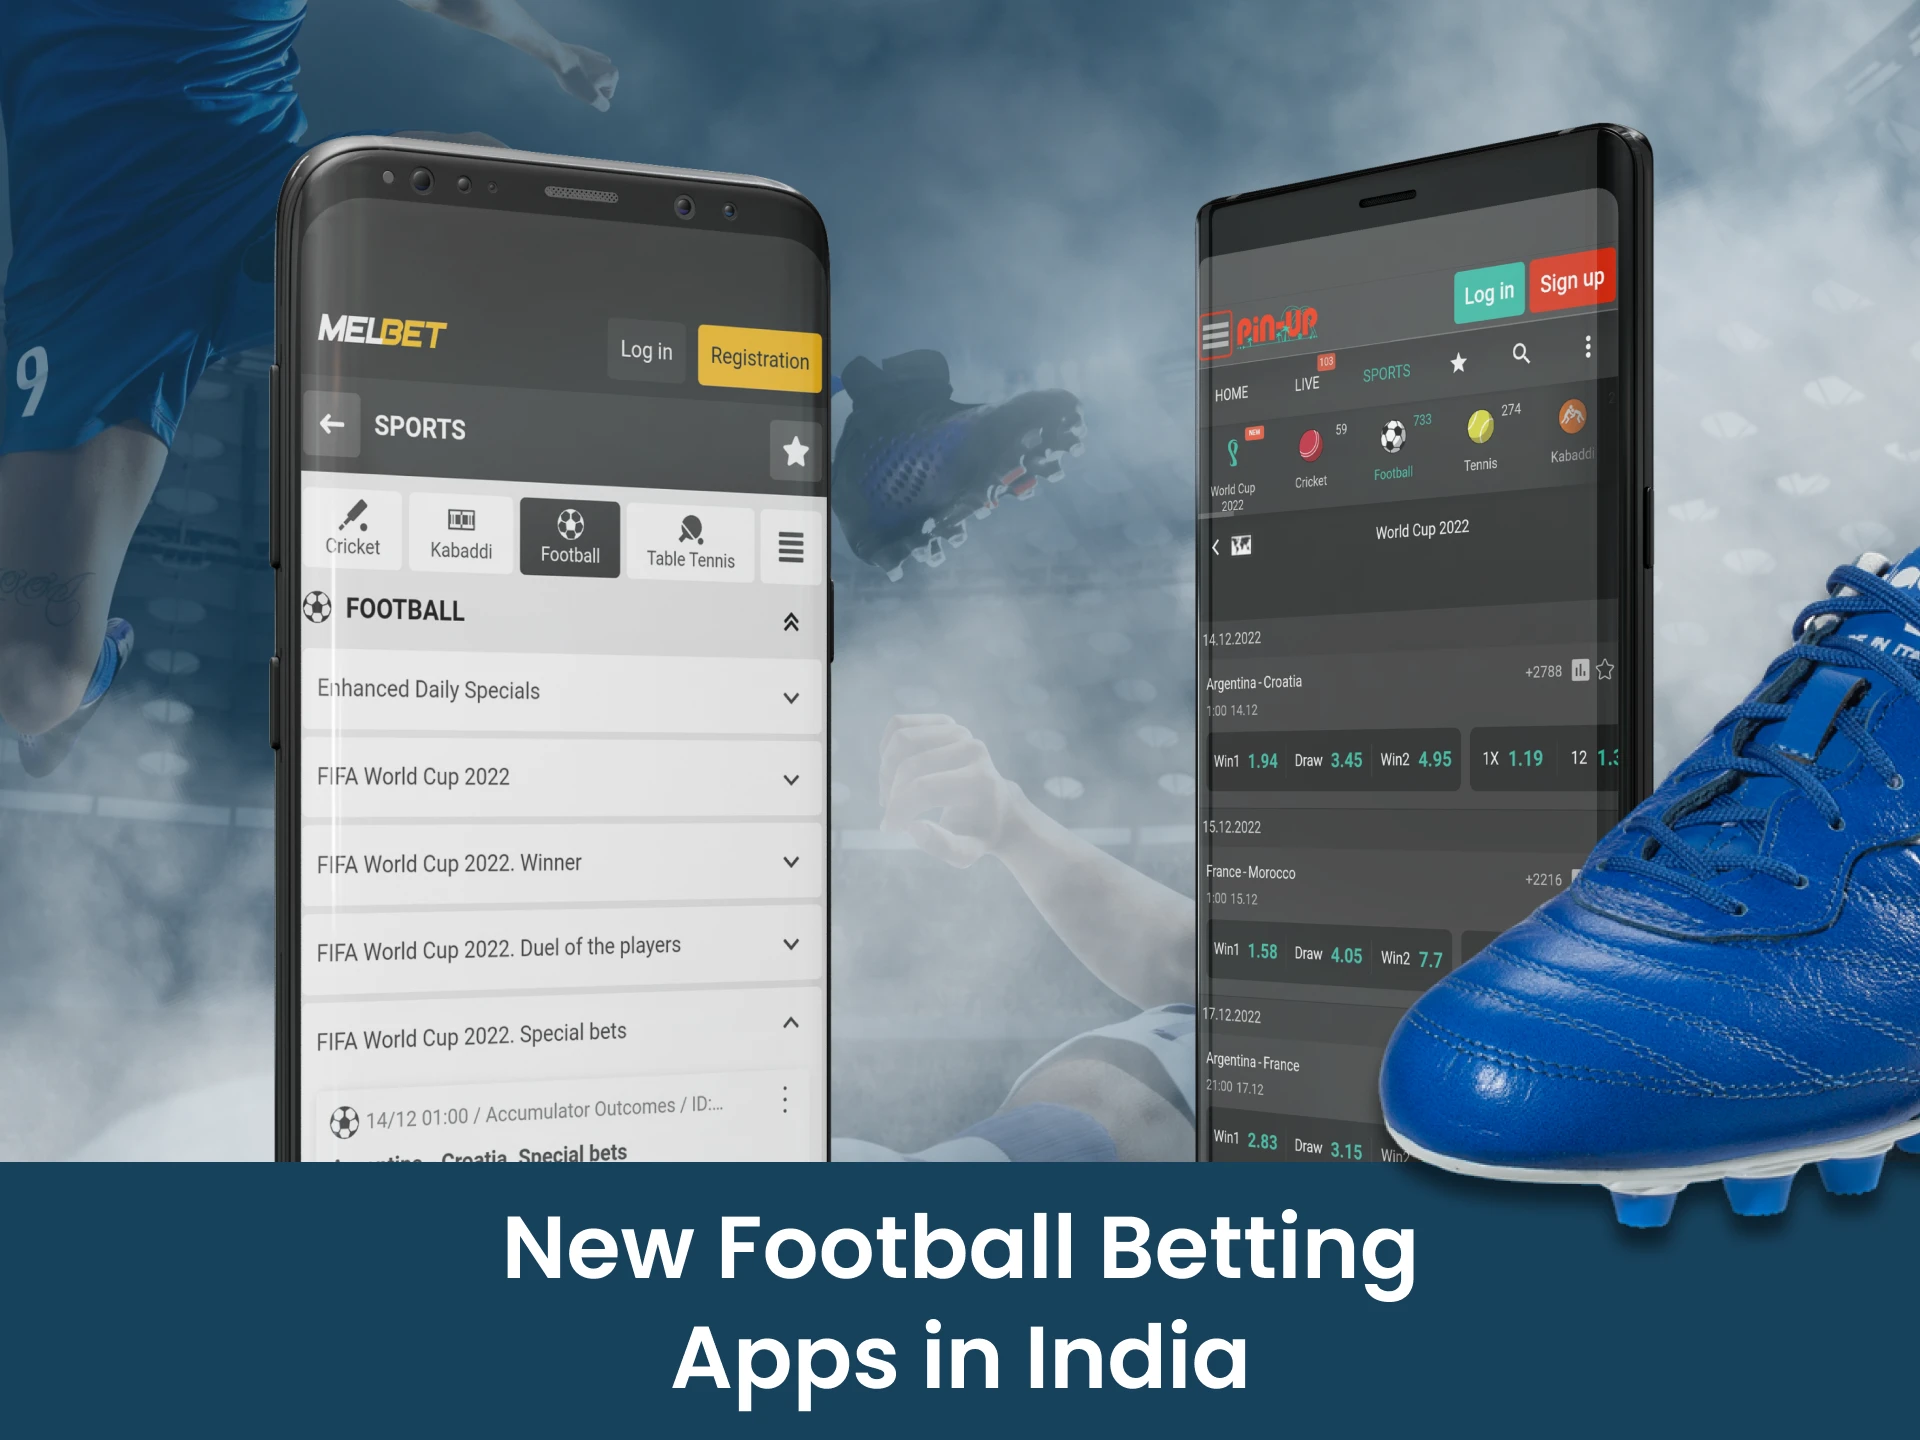 Try these new apps for betting on football.